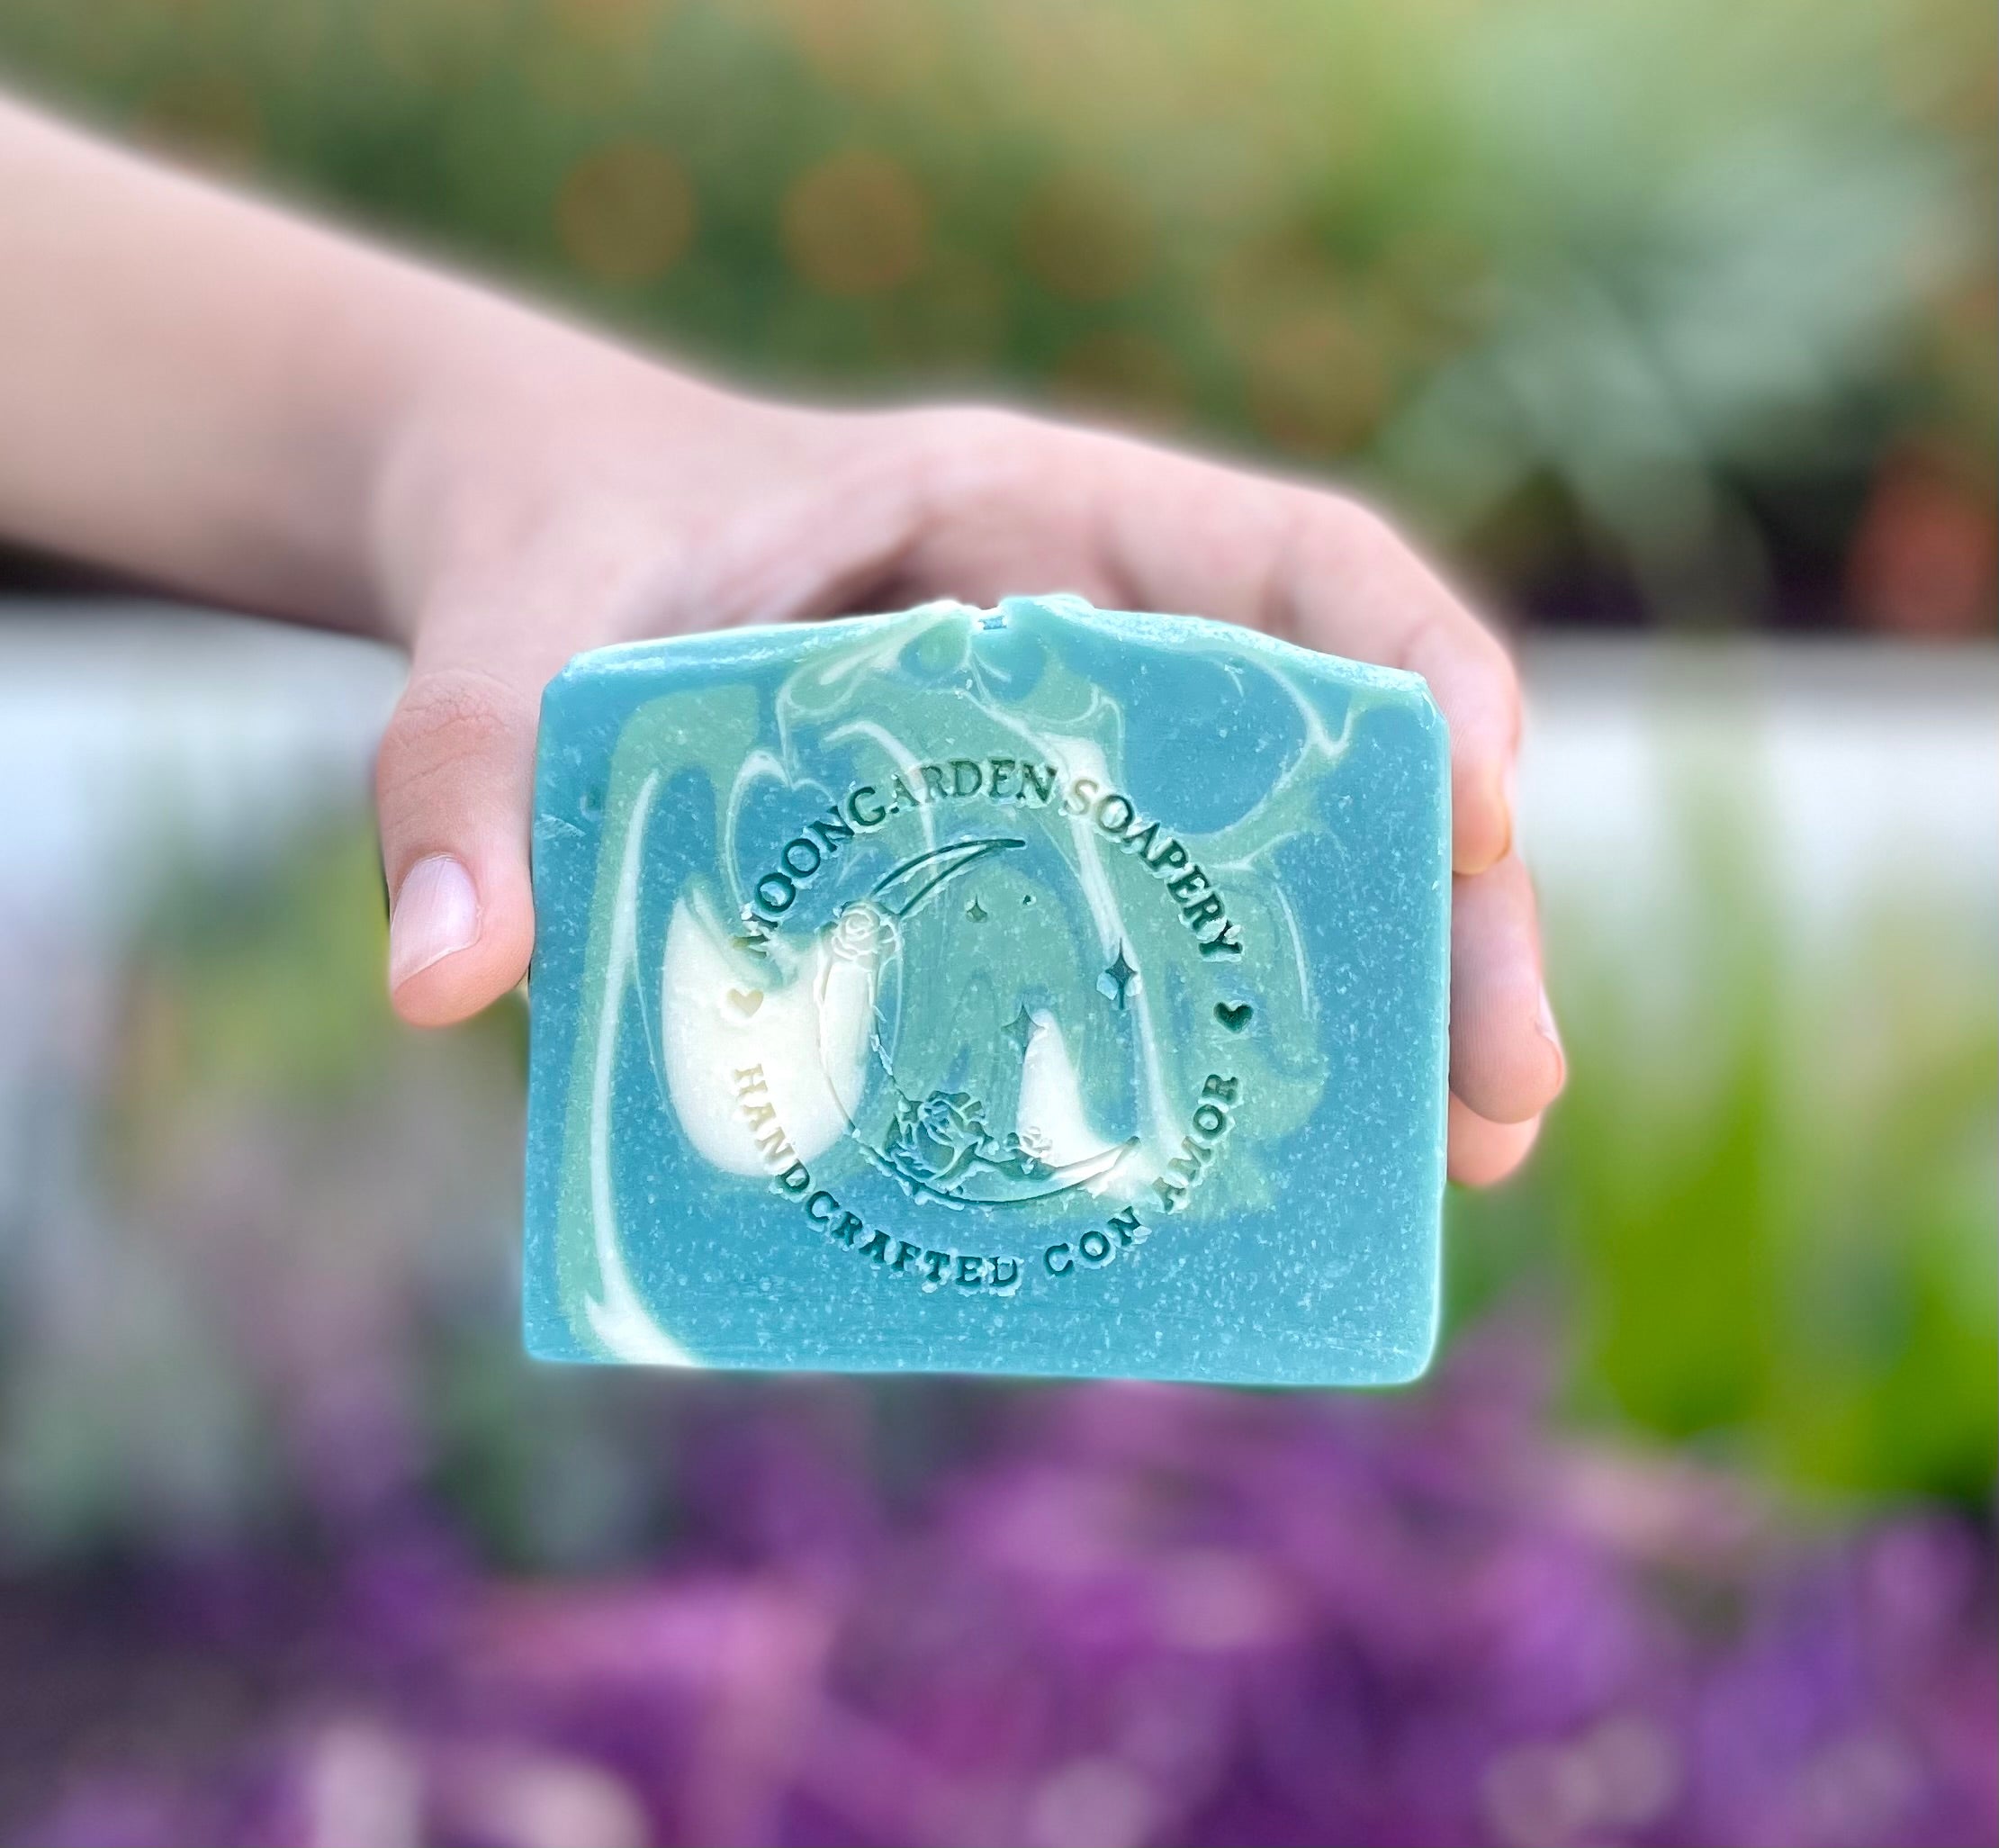 A human hand holding a bar of soap. The background is blurred with flowers and plants. 